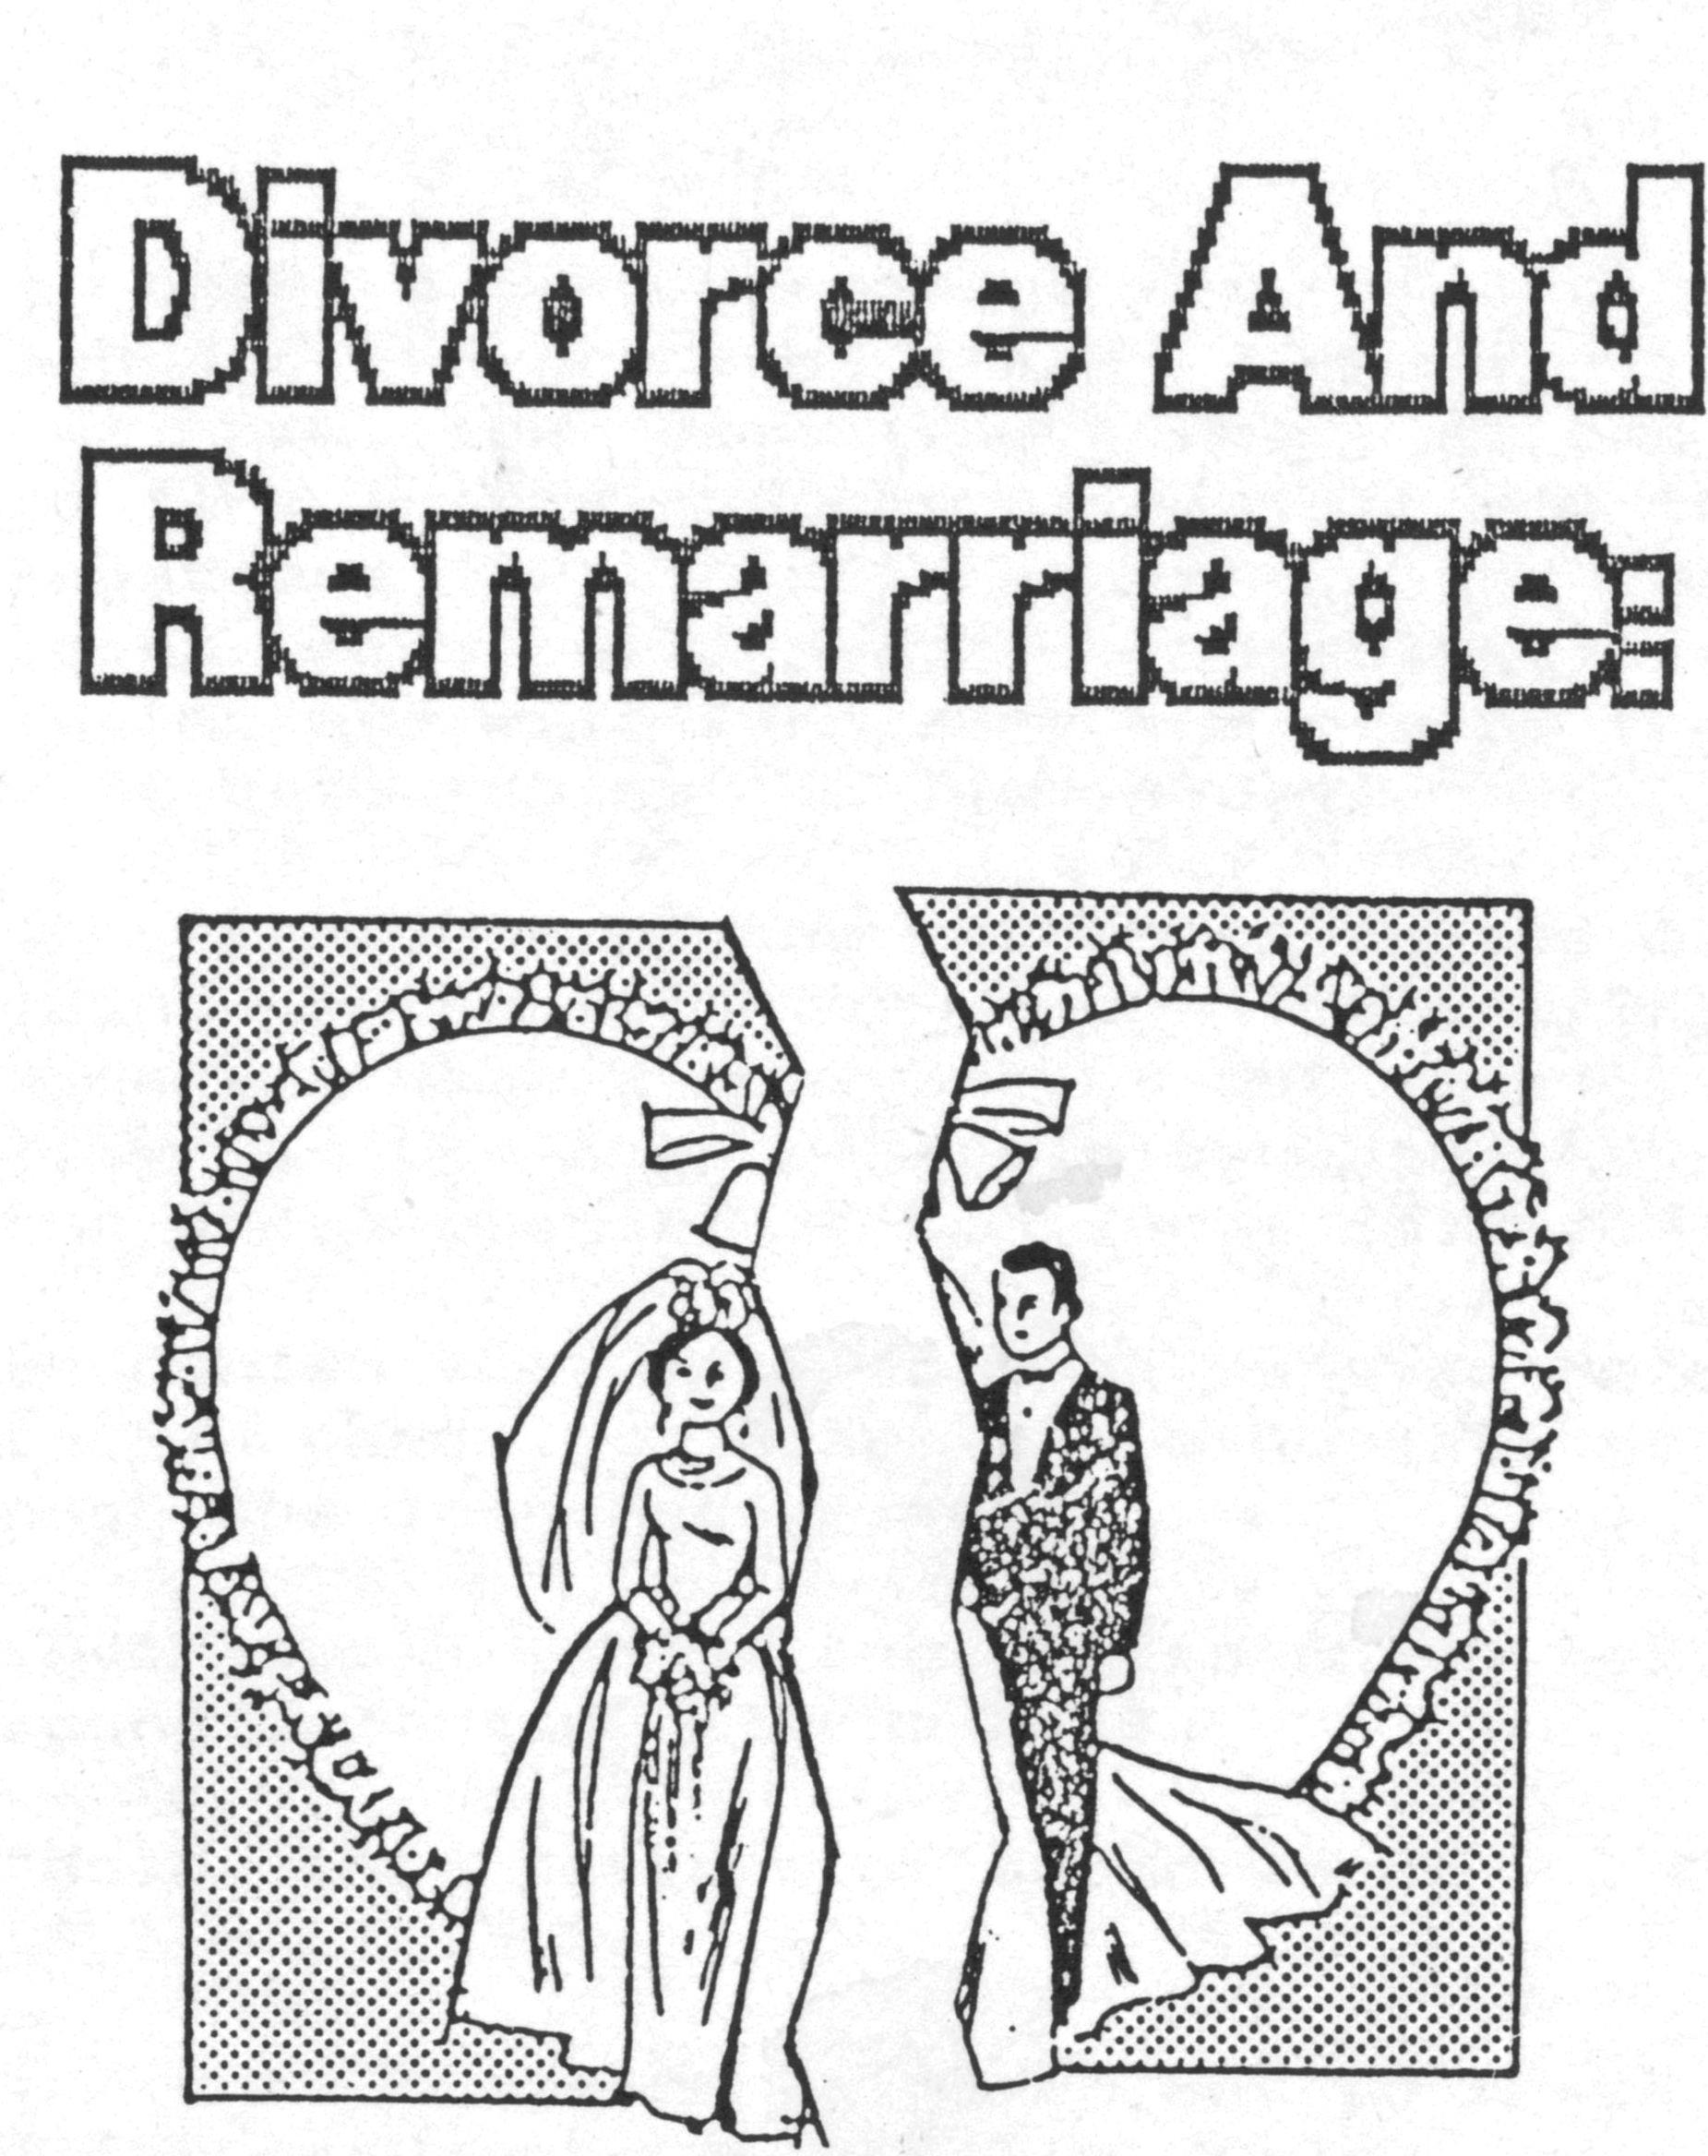 Emotional Arguments About Marriage, Divorce, and Remarriage